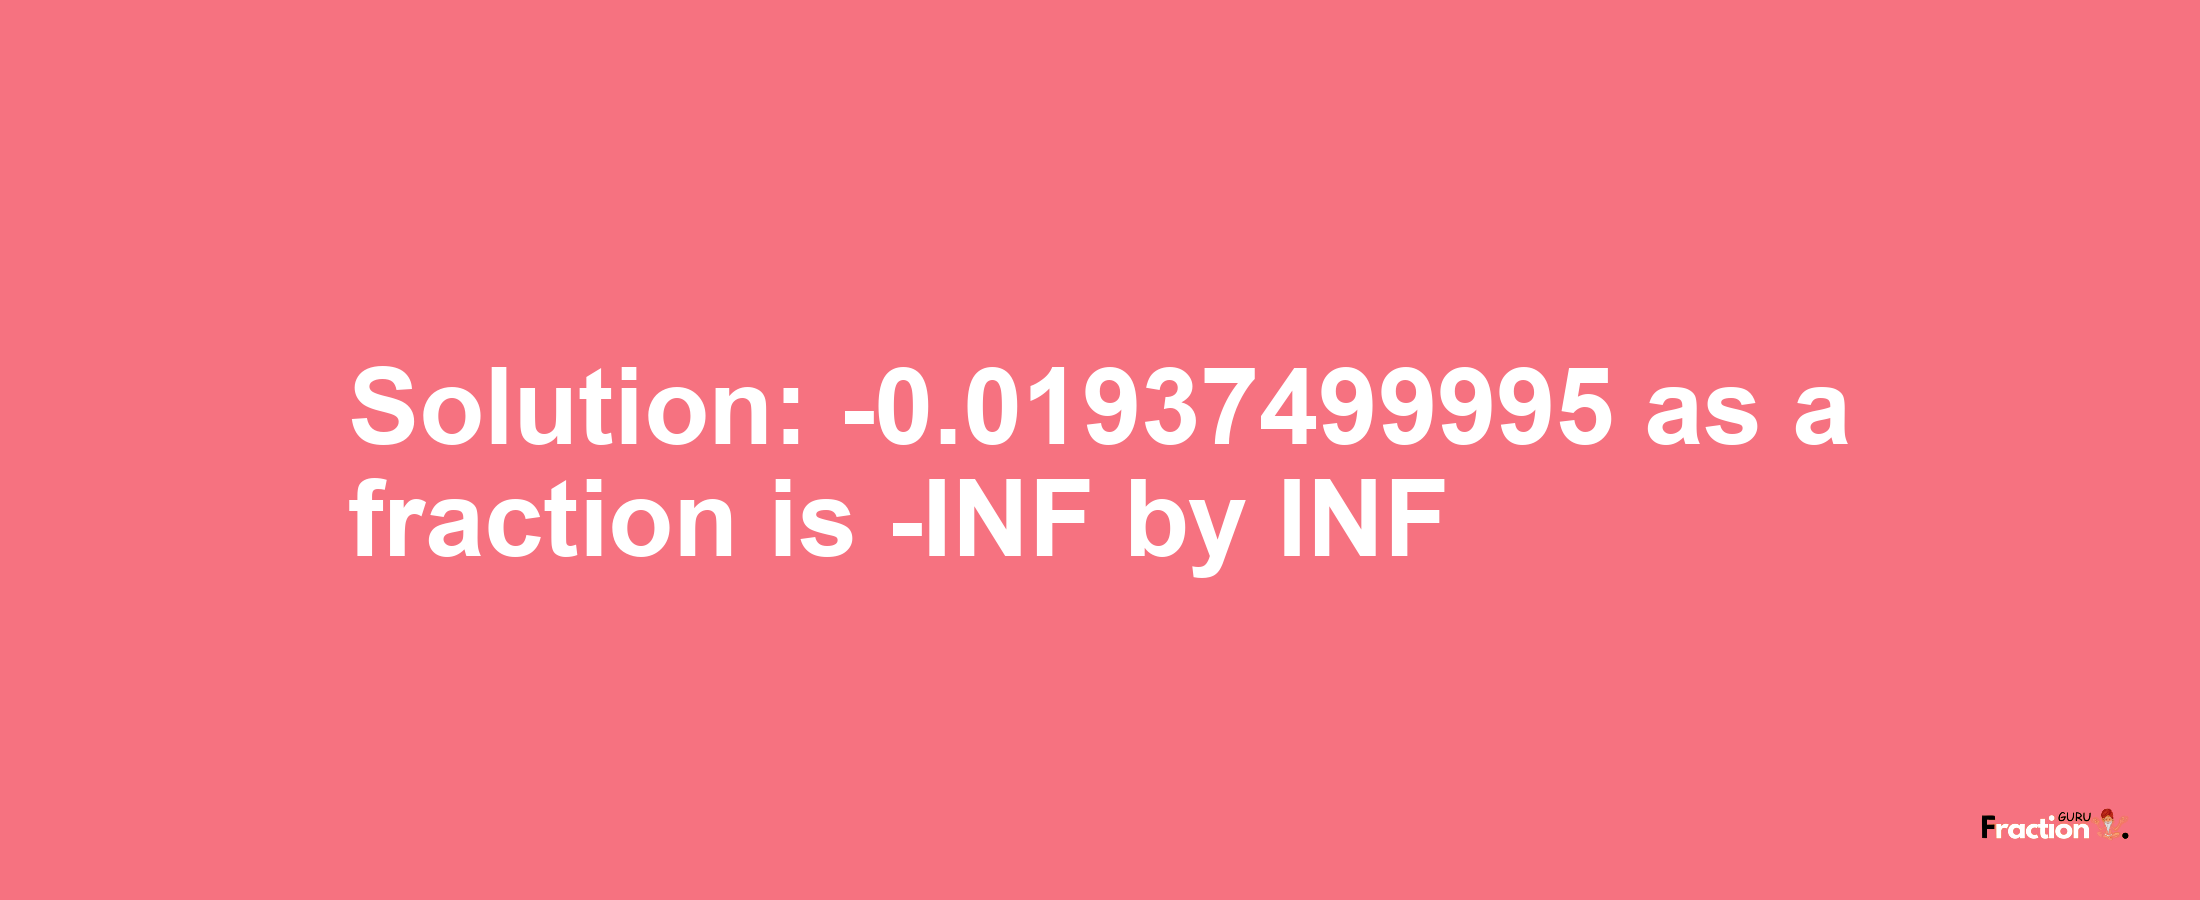 Solution:-0.01937499995 as a fraction is -INF/INF